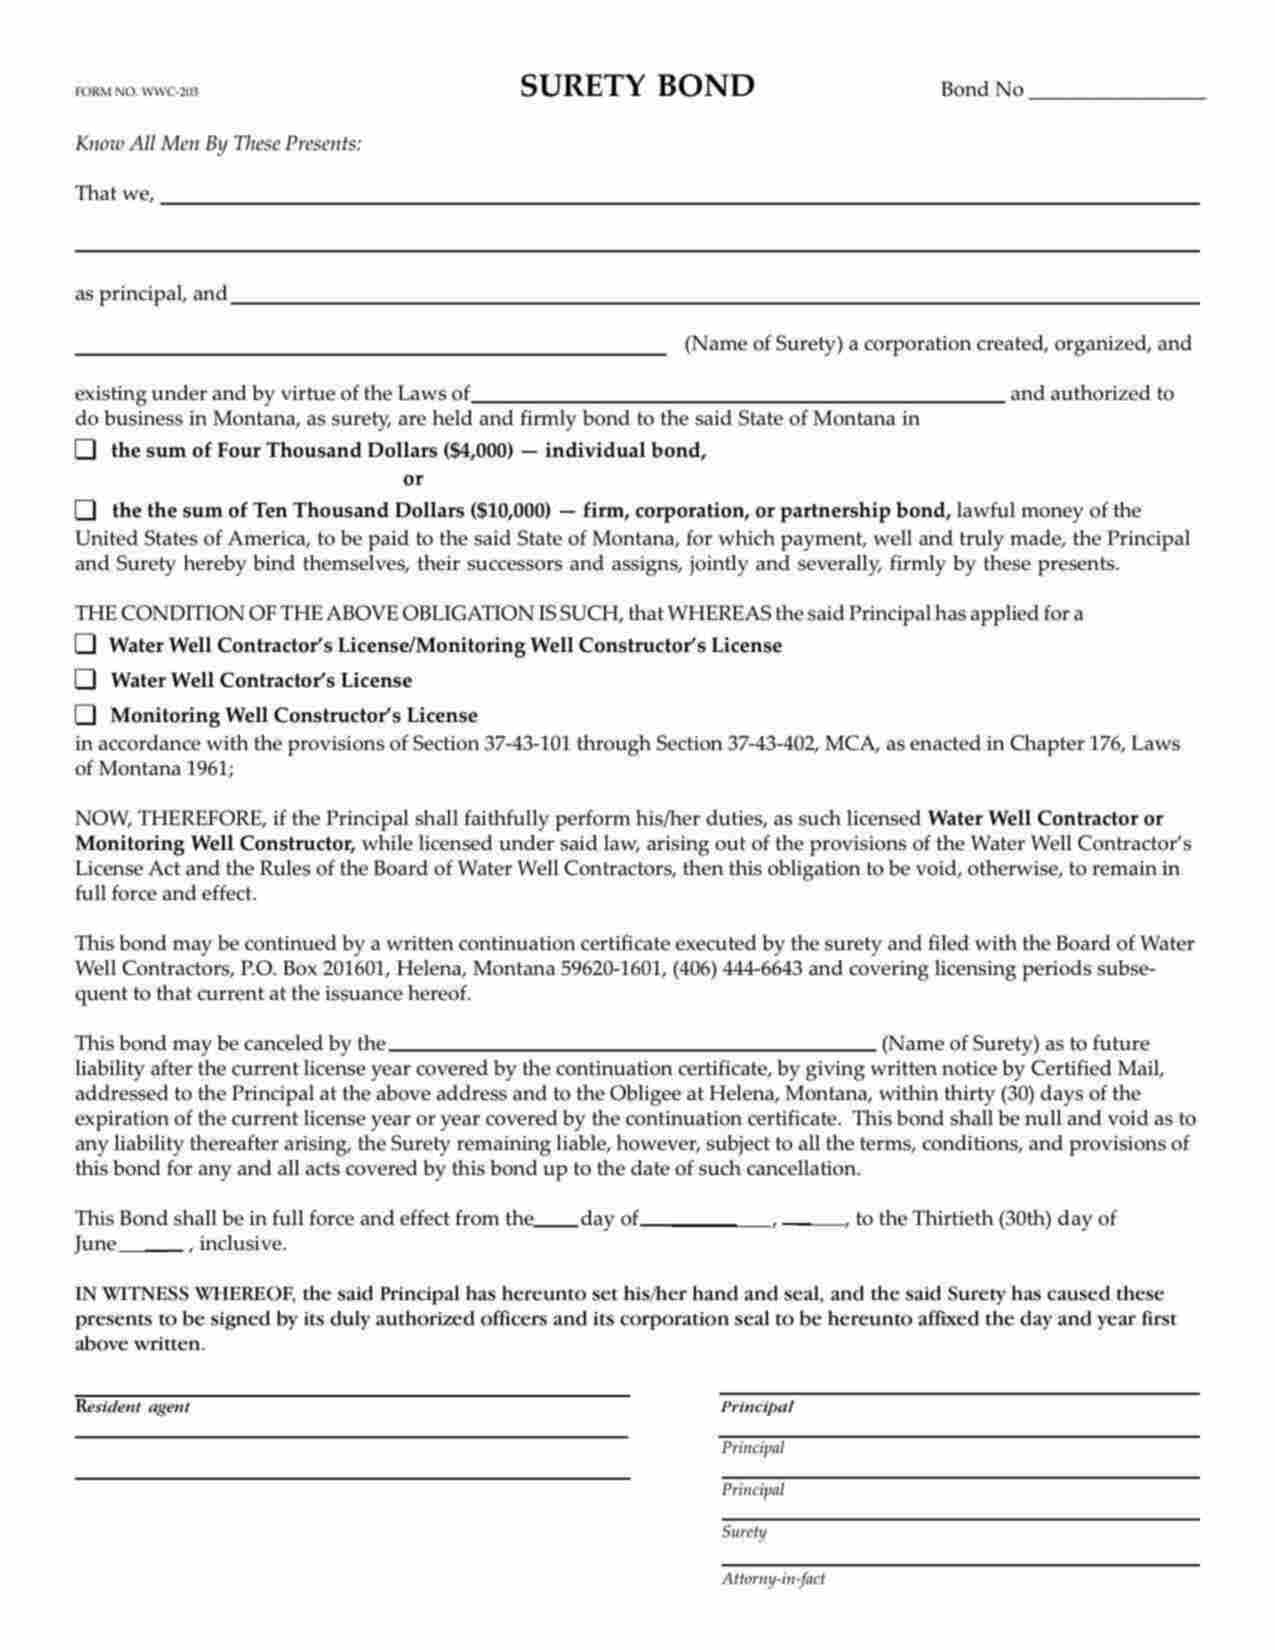 Montana Water Well Contractor's License/Monitoring Well Constructor's License Bond Form